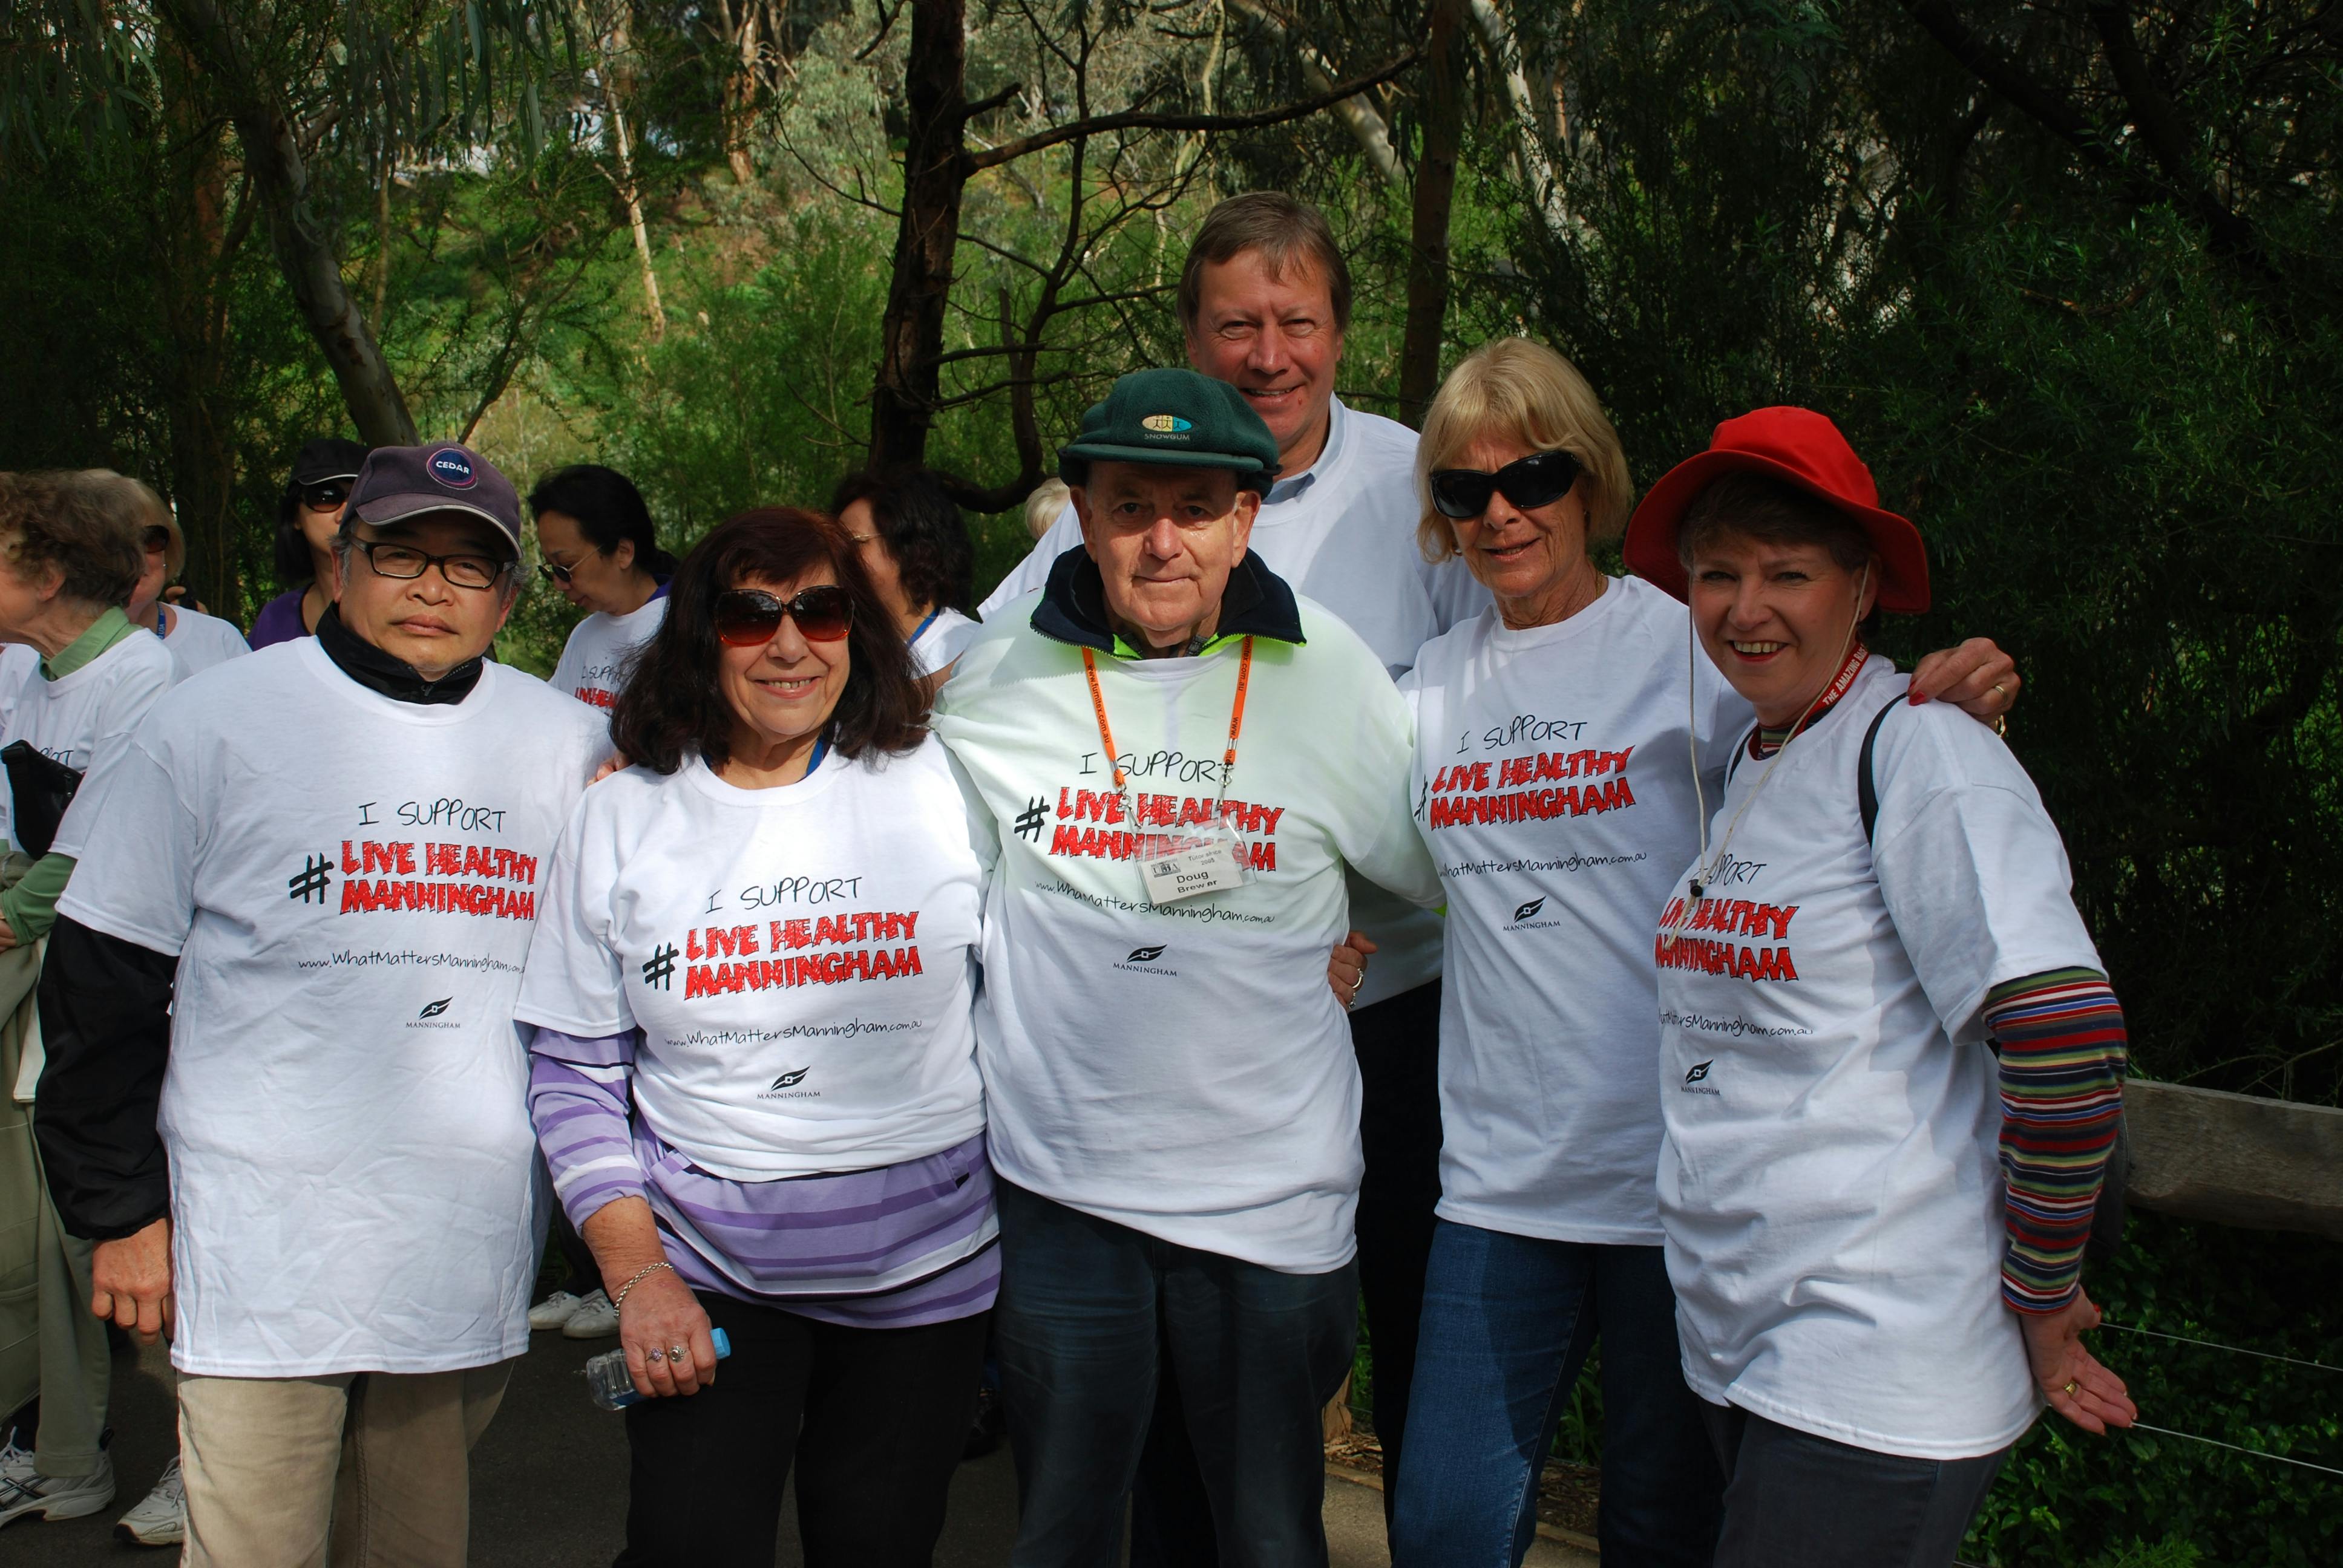 Manningham U3A Walking Group show their support for the #LiveHealthManningham campaign.